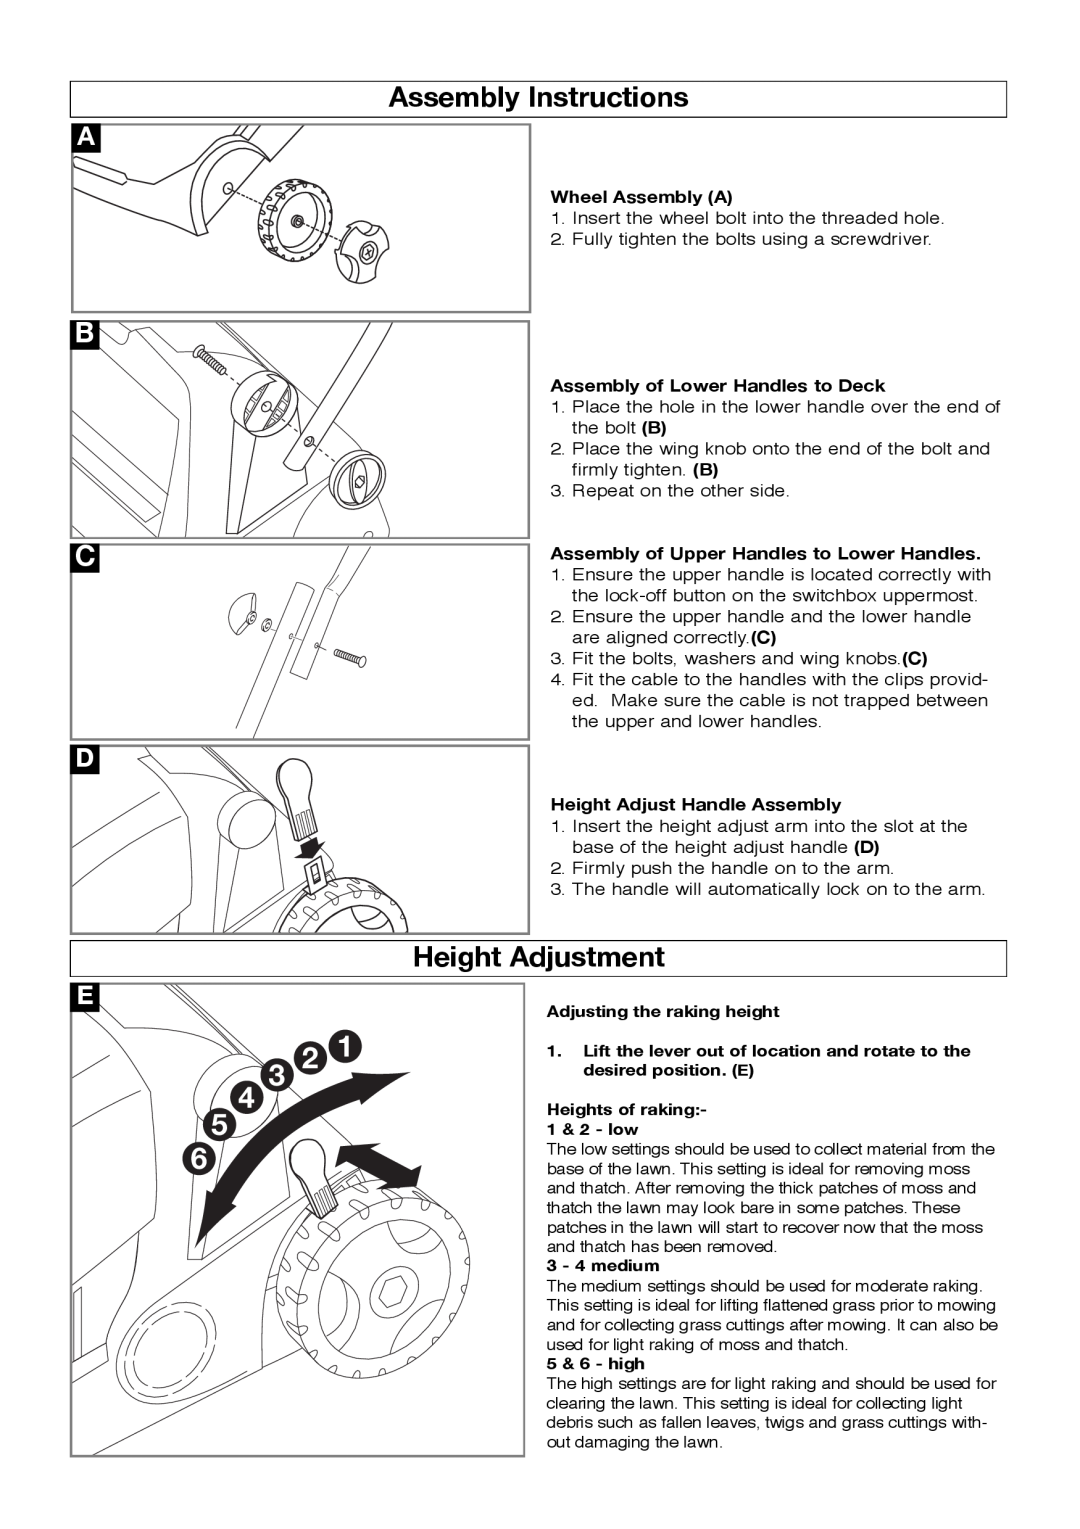 Flymo lawnrake manual Assembly Instructions, Height Adjustment, Wheel Assembly A, Assembly of Lower Handles to Deck 